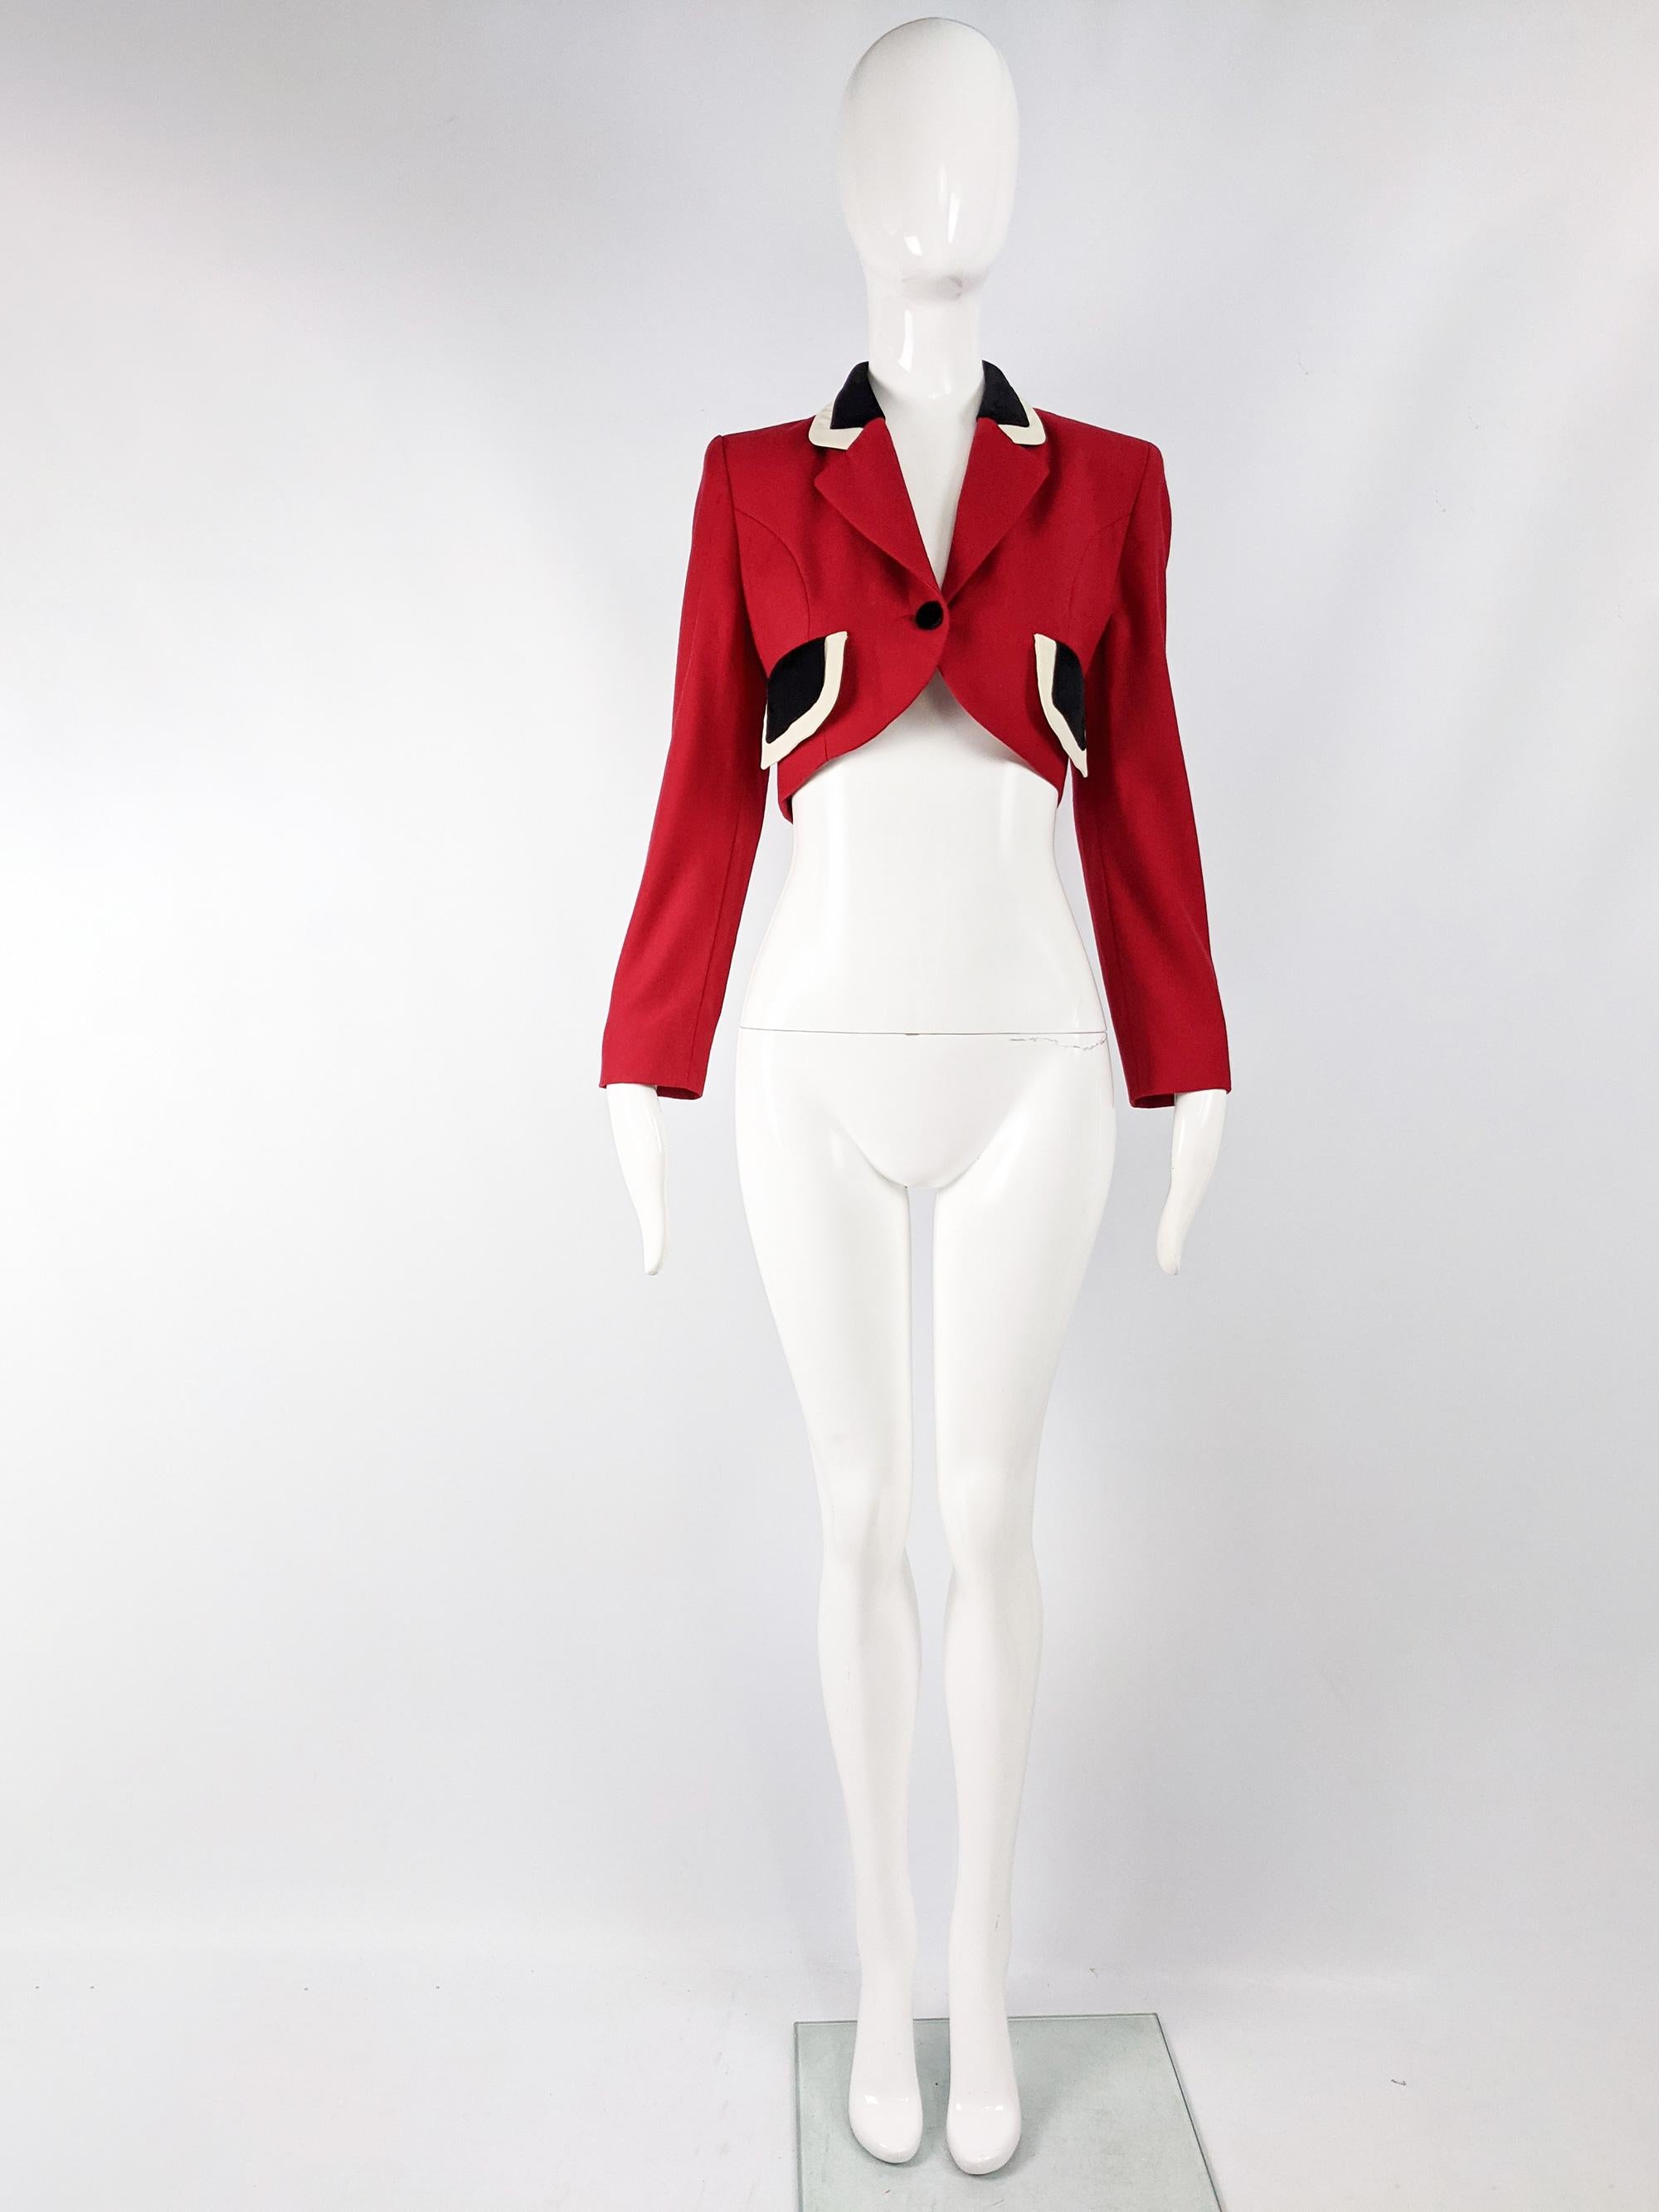 A chic vintage womens Moschino cropped blazer jacket from the 80s. In a red wool crepe with a black and white collar and pocket flaps. It has Moschino's iconic black and white vertical striped lining. 

Size: Marked IT 38 but really fits like a